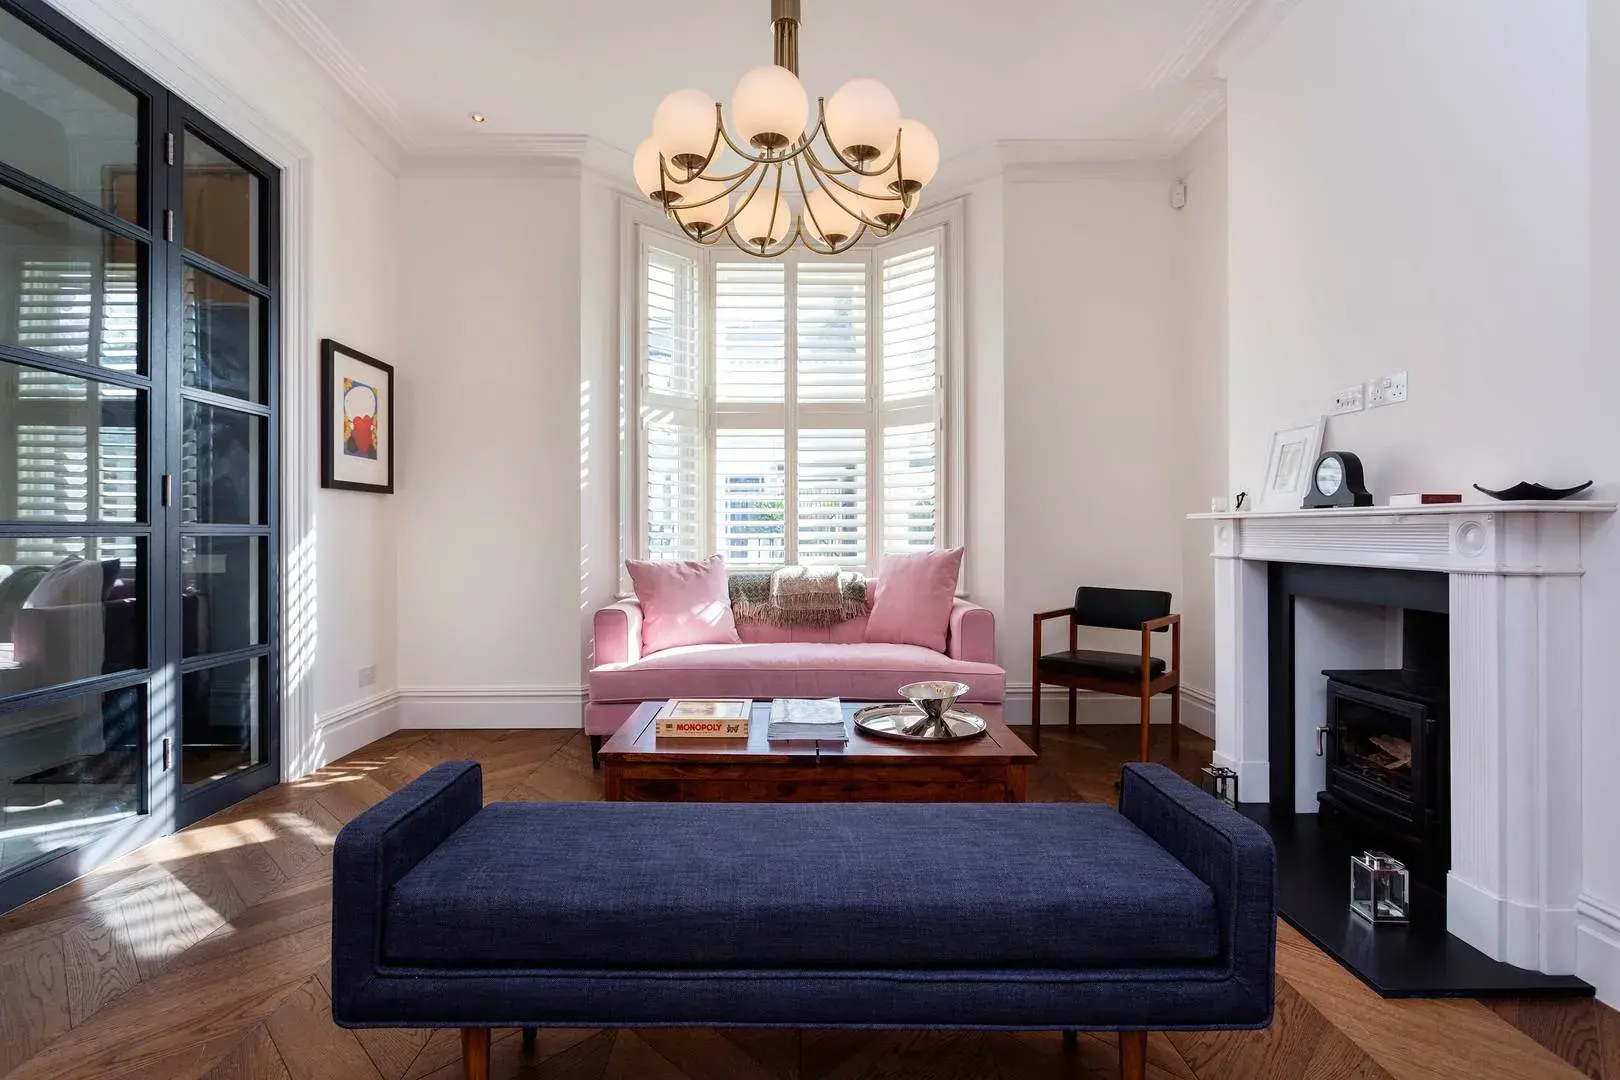 Alderbrook Road, holiday home in Clapham, London